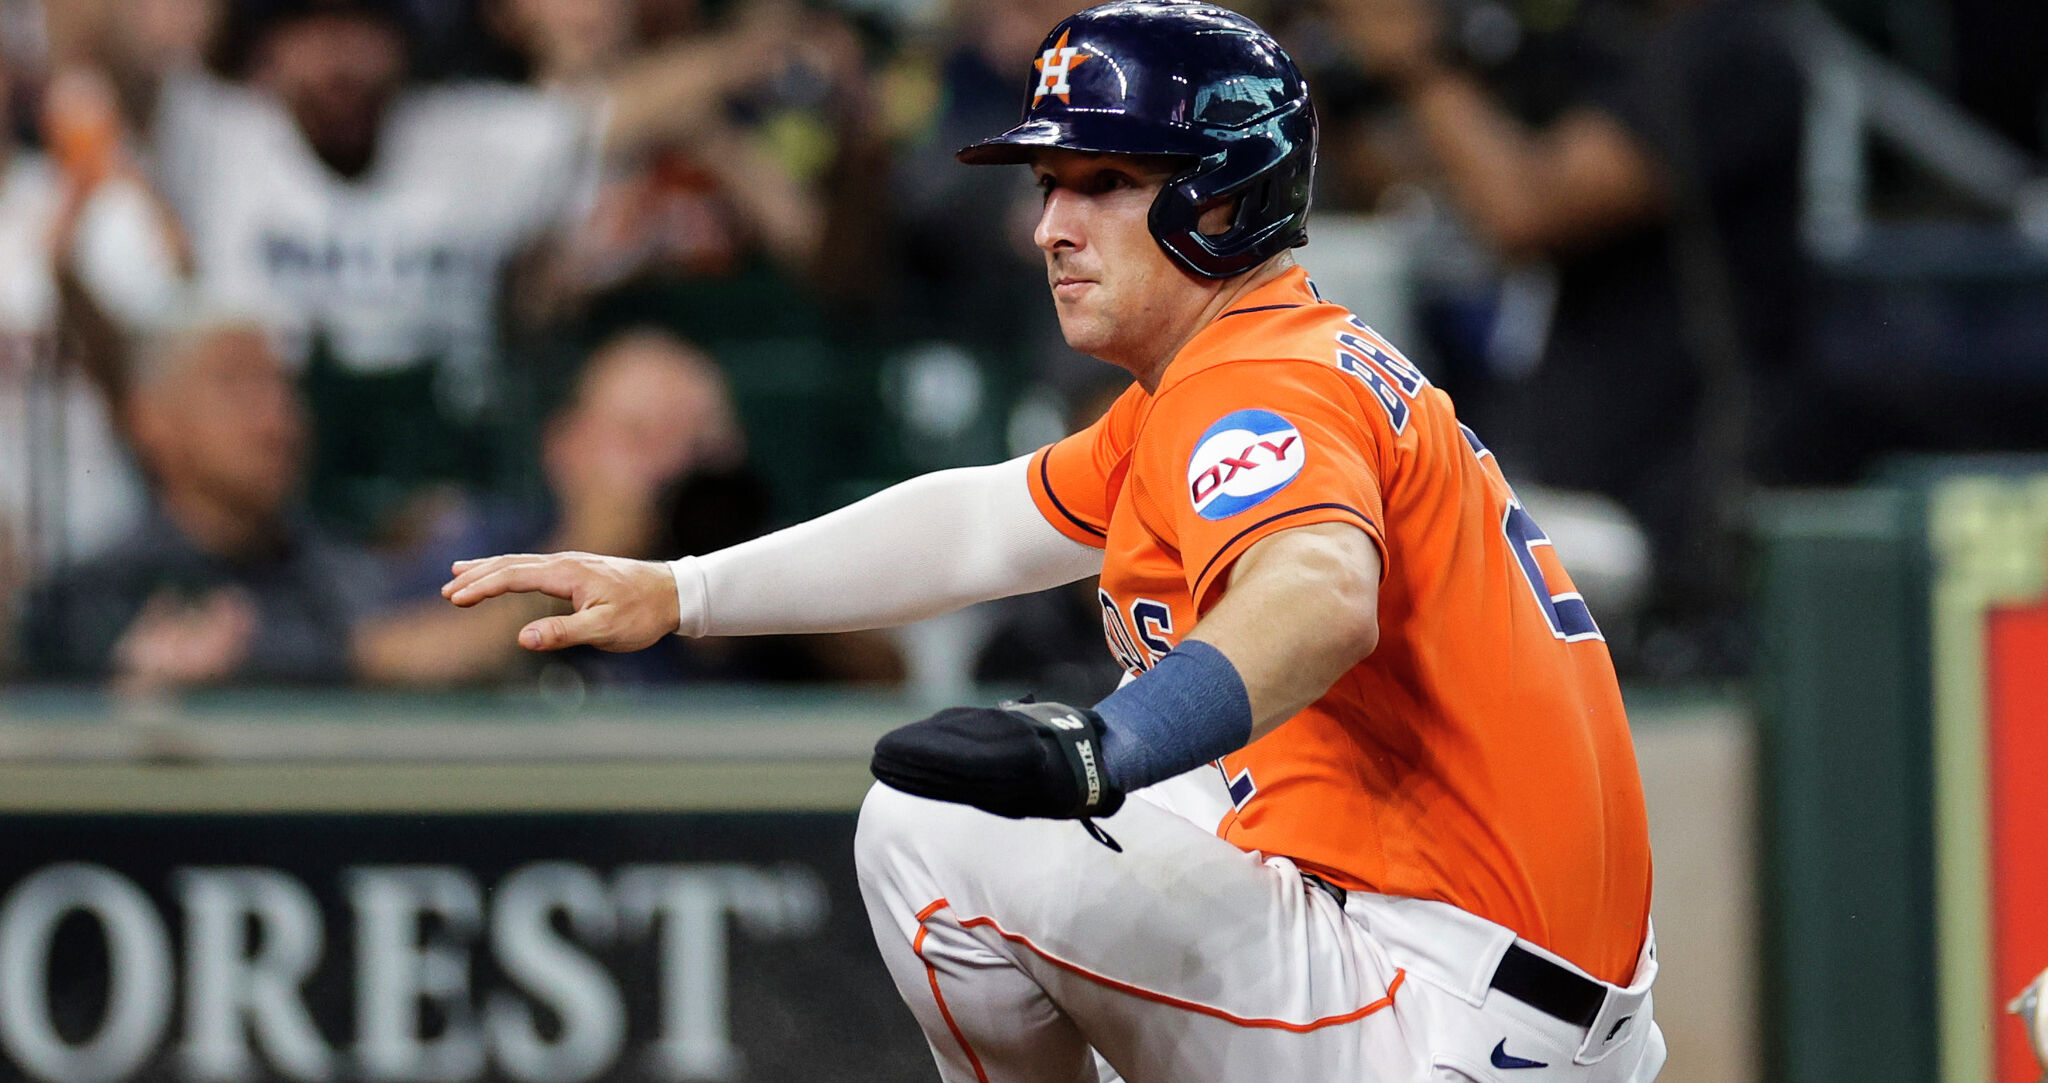 Houston Astros fans relieved as team salvages series finale vs